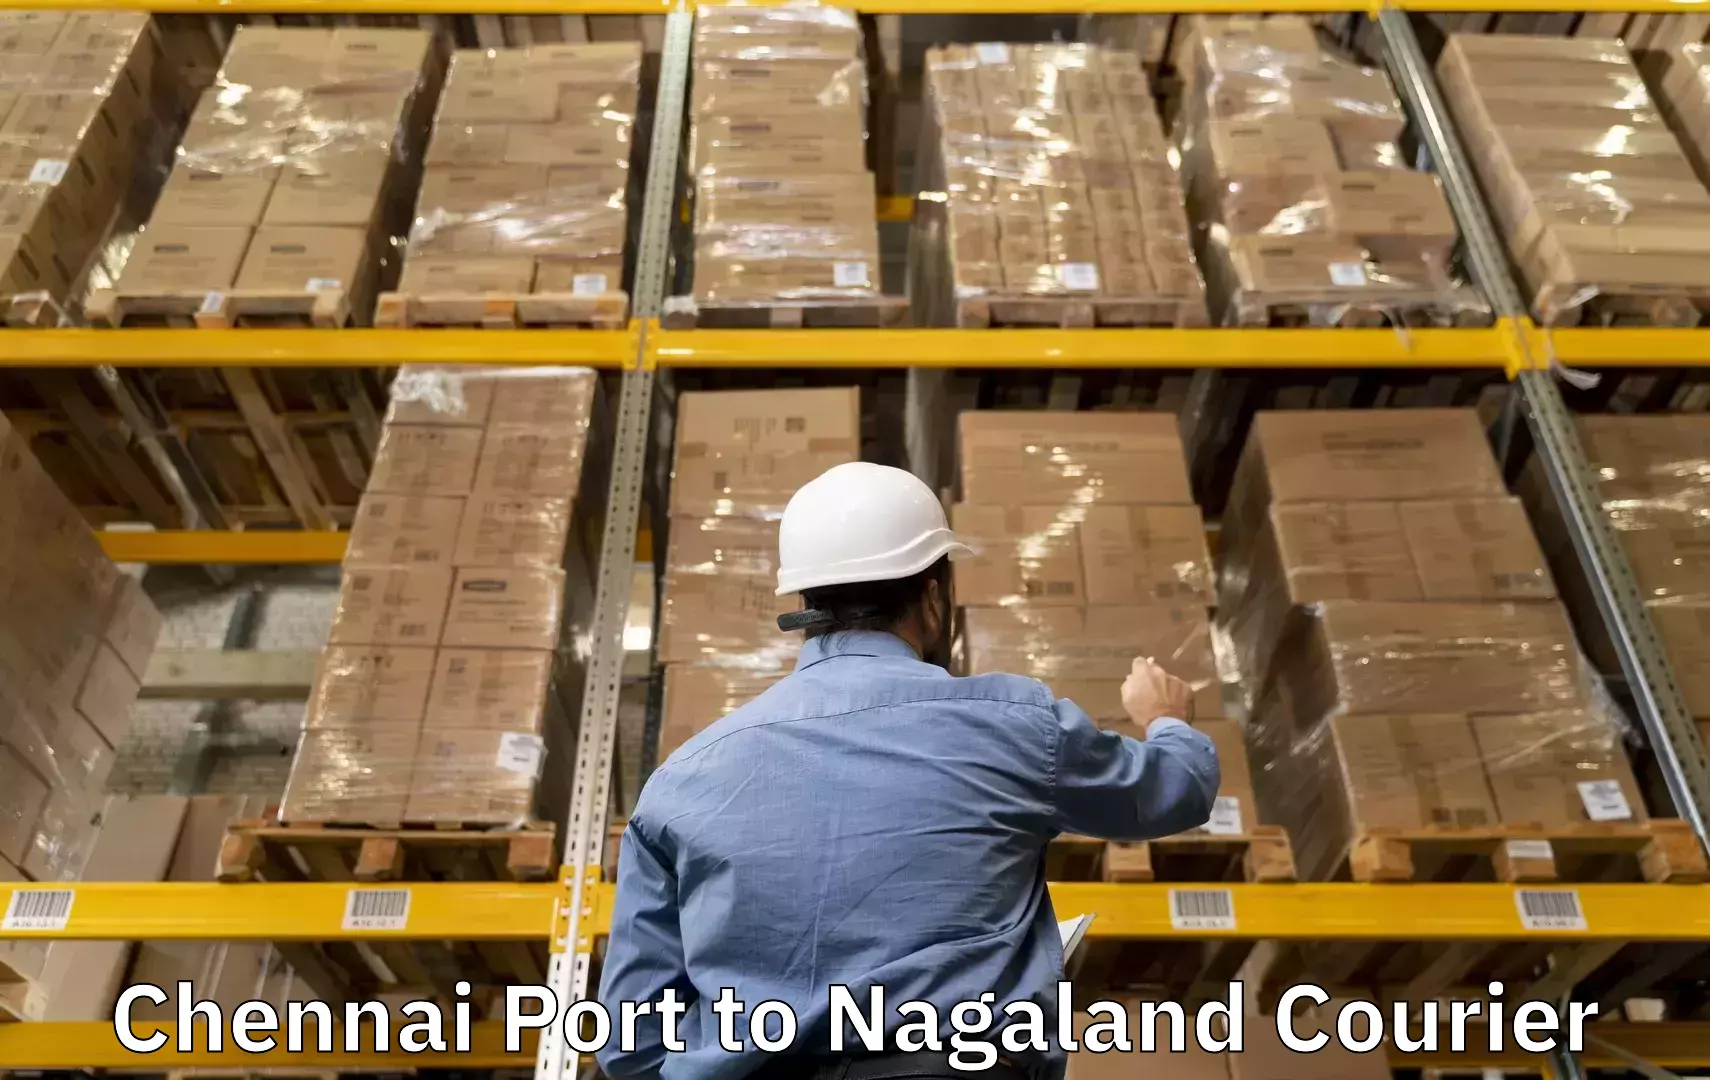 Luggage delivery app Chennai Port to Nagaland